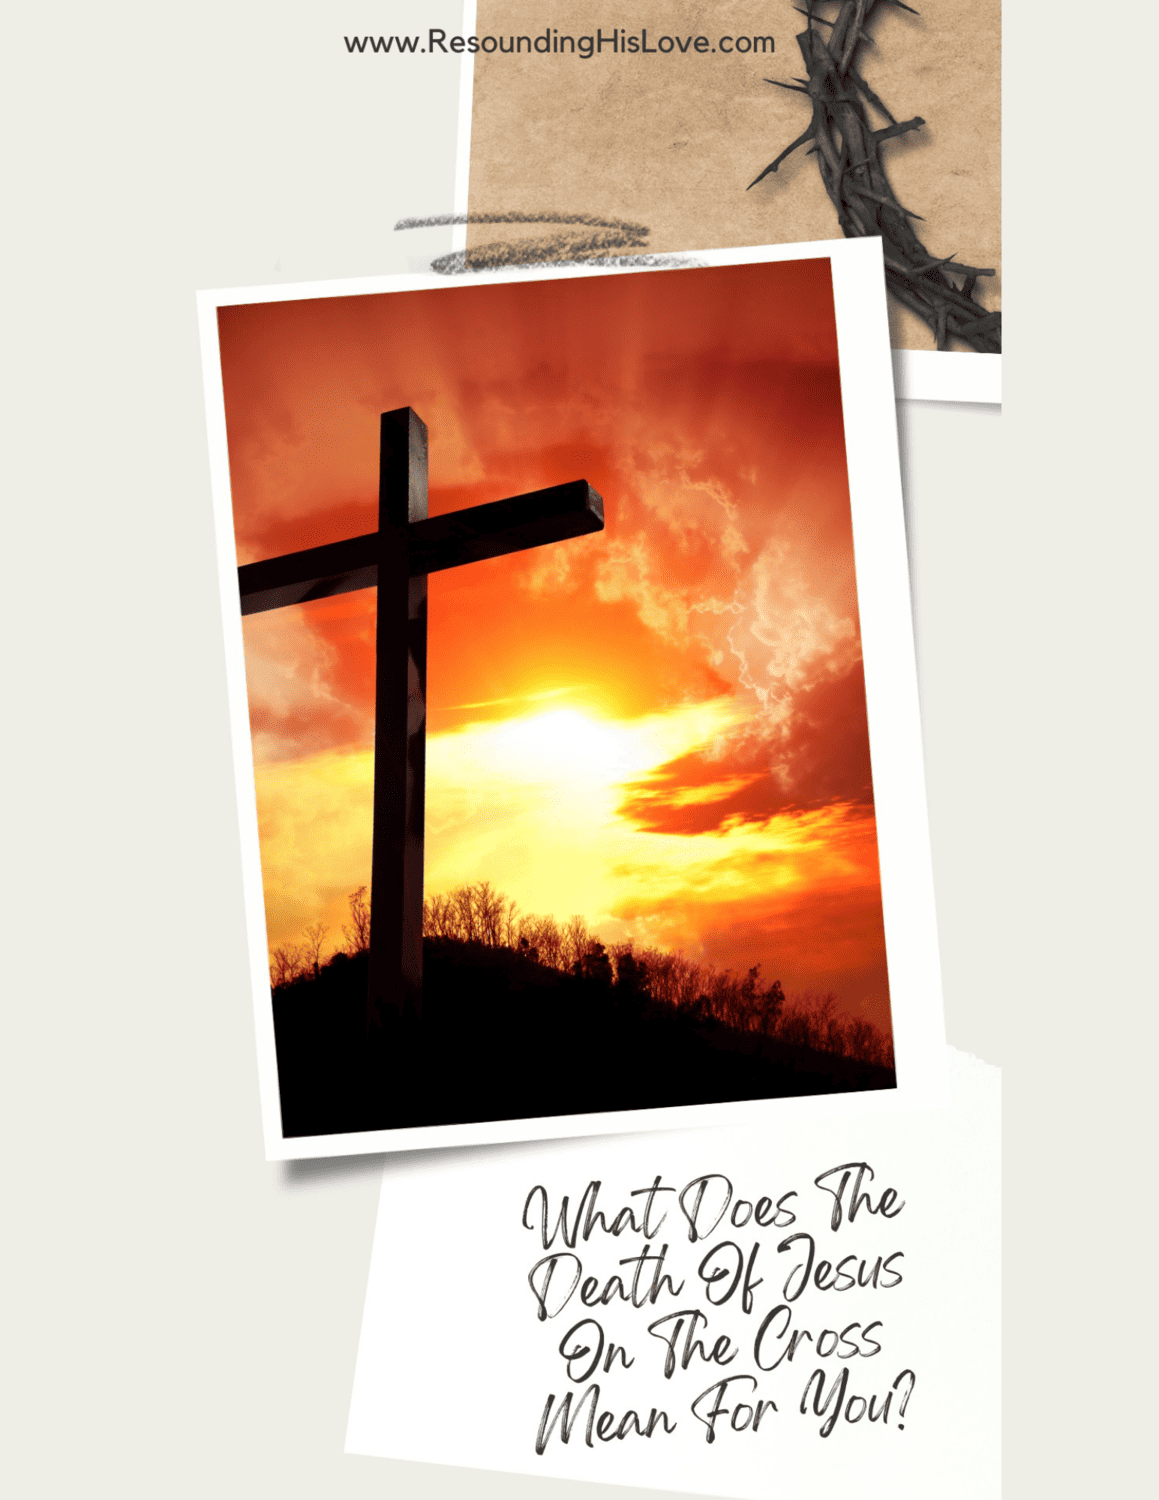 crown of thorns and a wooden cross with a sunset background with text What Does the Death of Jesus on the Cross Mean for You?